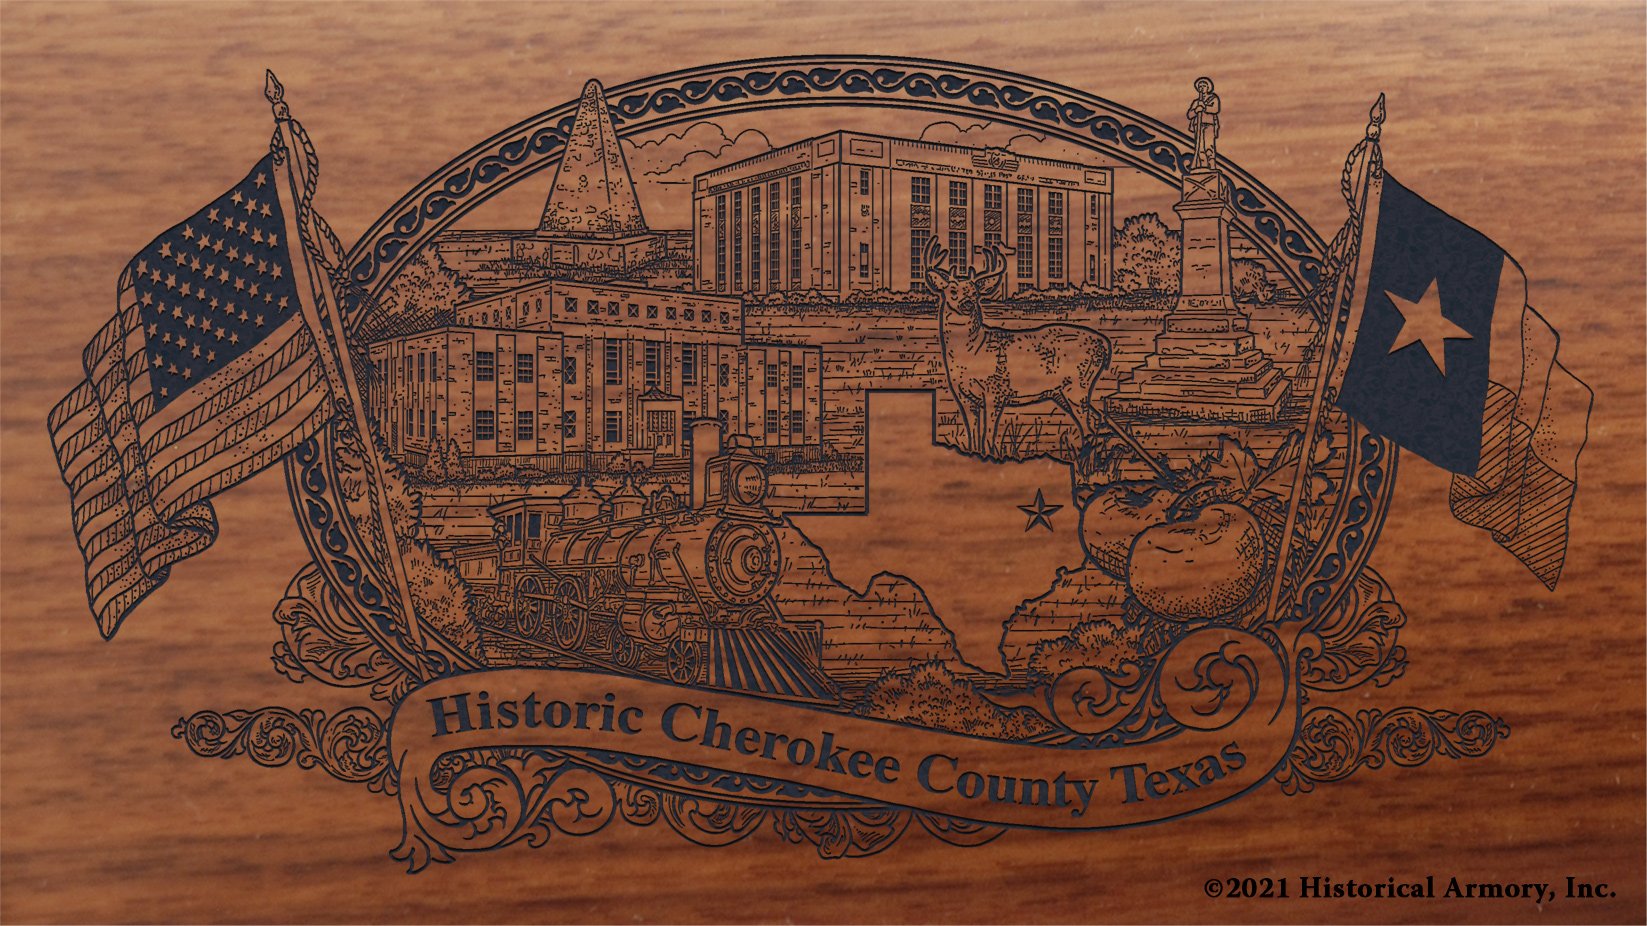 Engraved artwork | History of Cherokee County Texas | Historical Armory